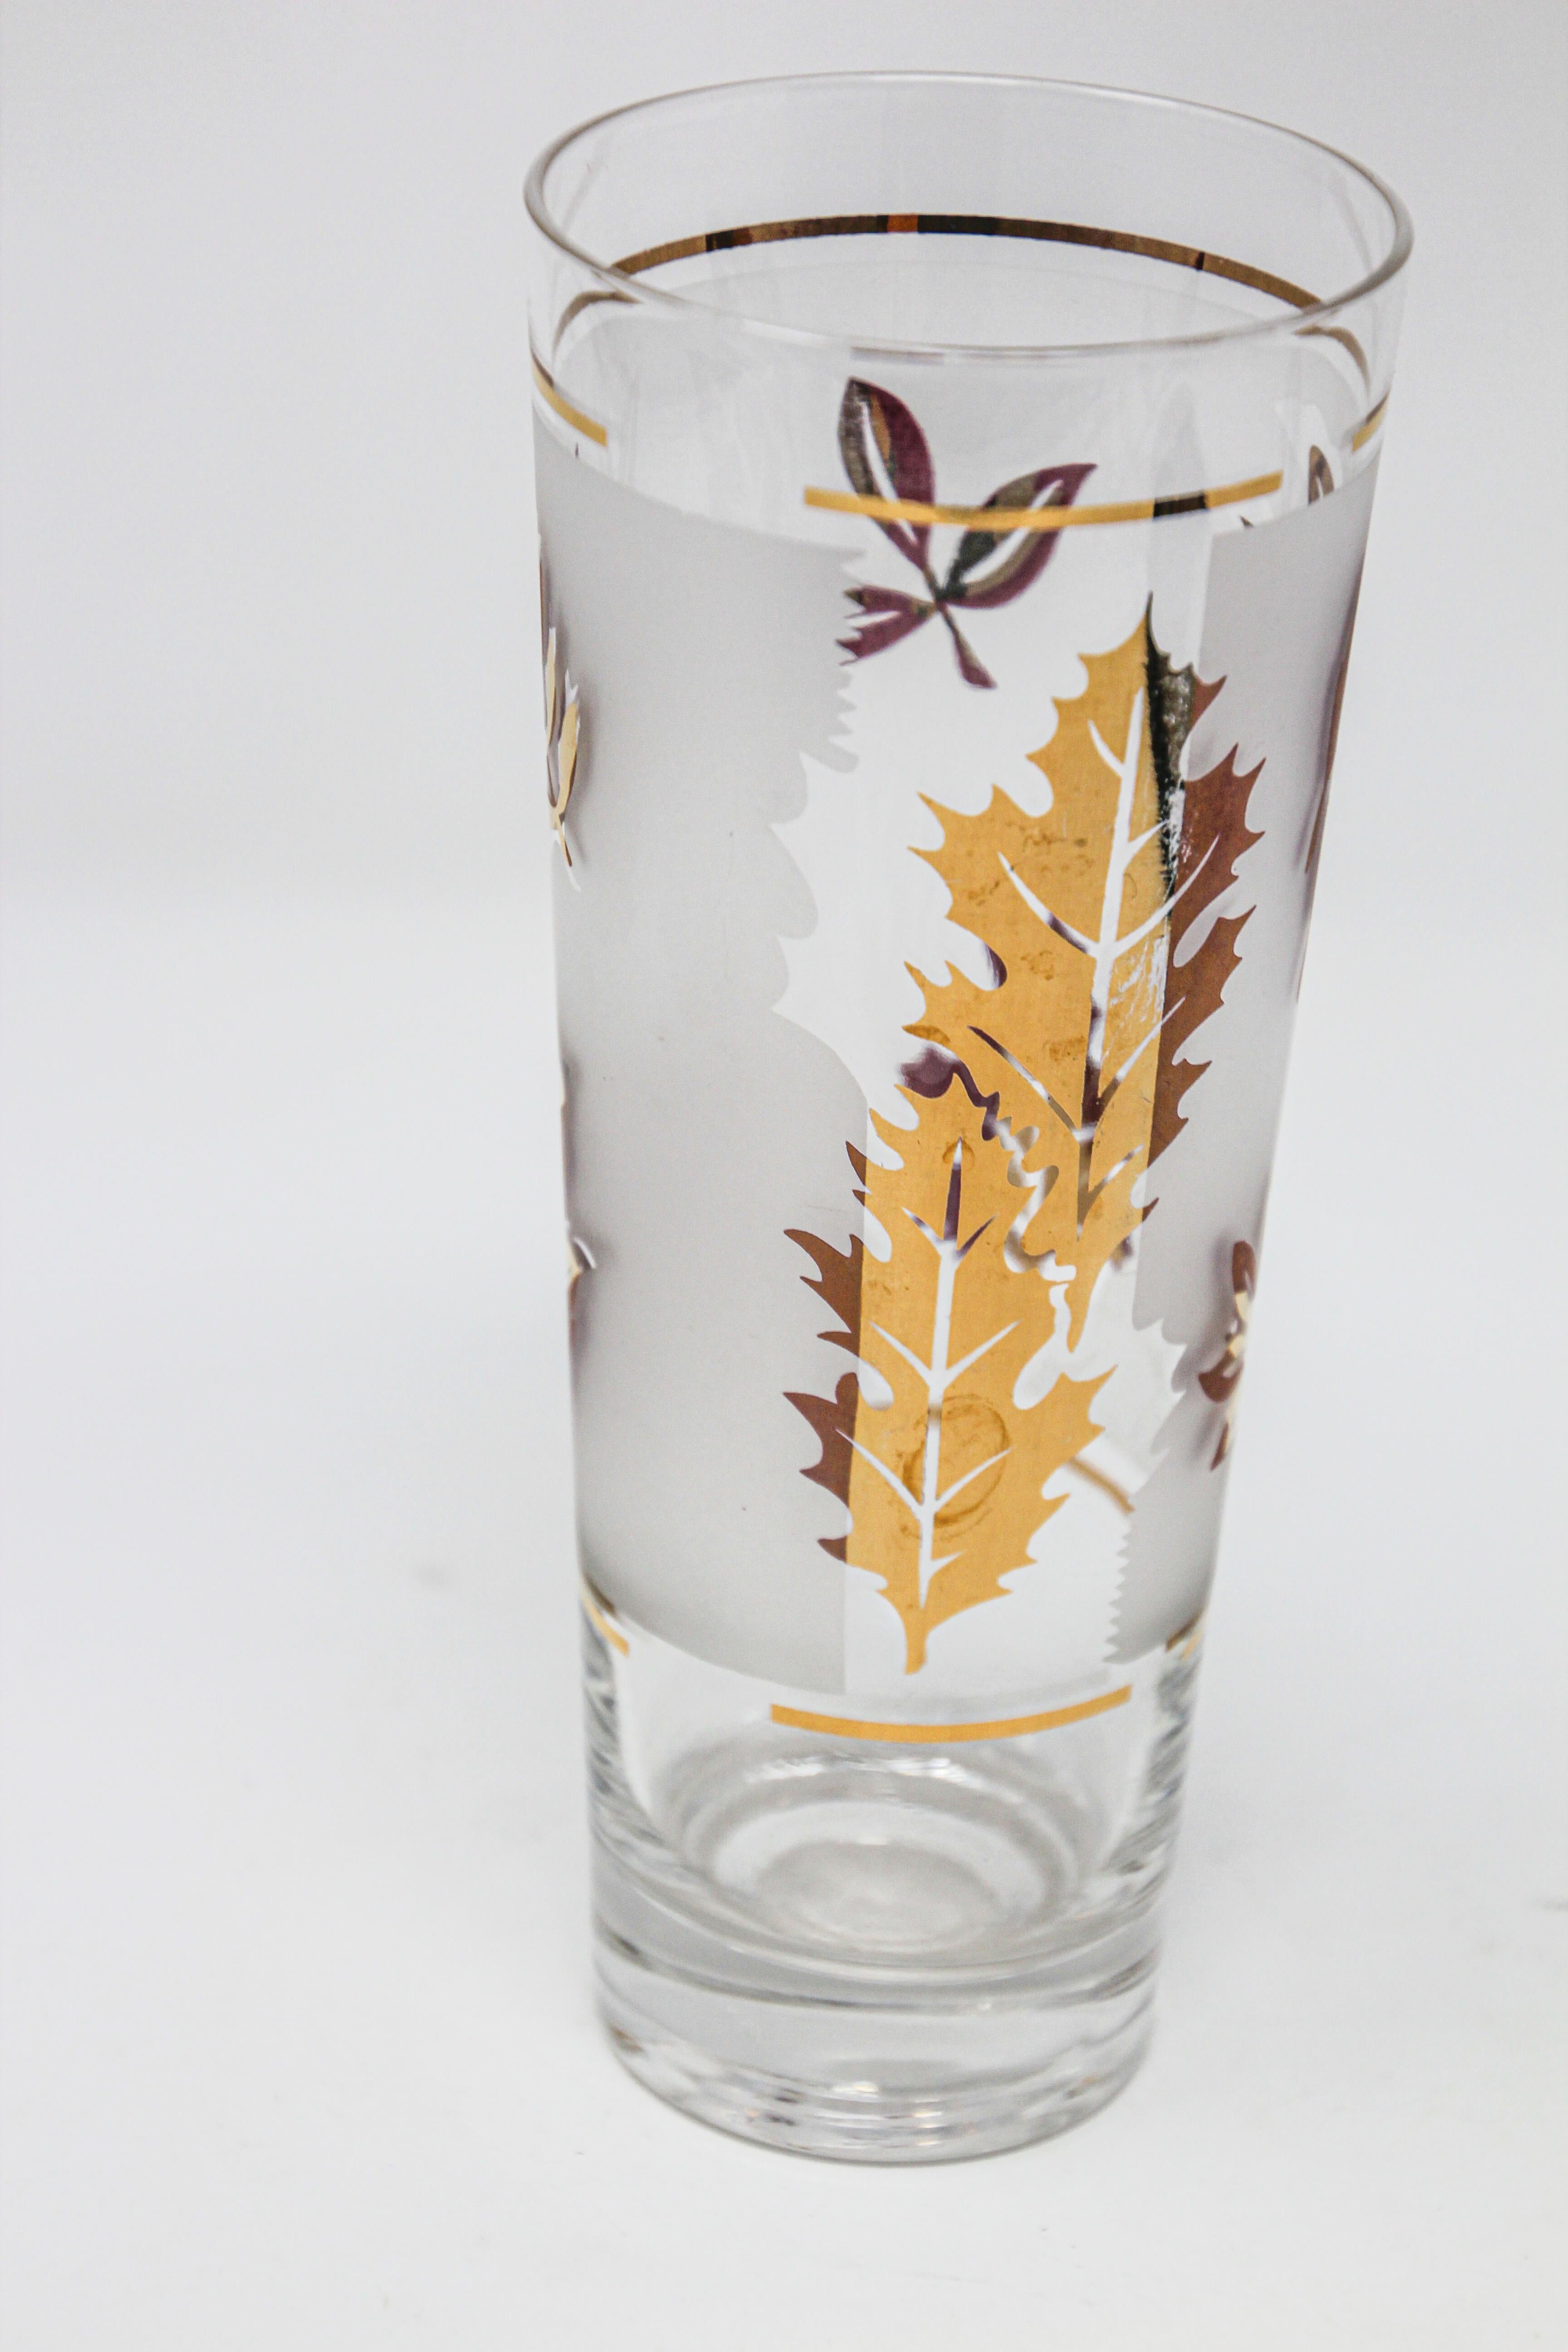 Vintage glass vase manufactured by Libbey.
1950s Hollywood Regency.
Decorated with a classical gold lief pattern on frosted glass.
In good condition, perfect for the holidays and gorgeous on display in a cabinet while not in use.
Please see pictures